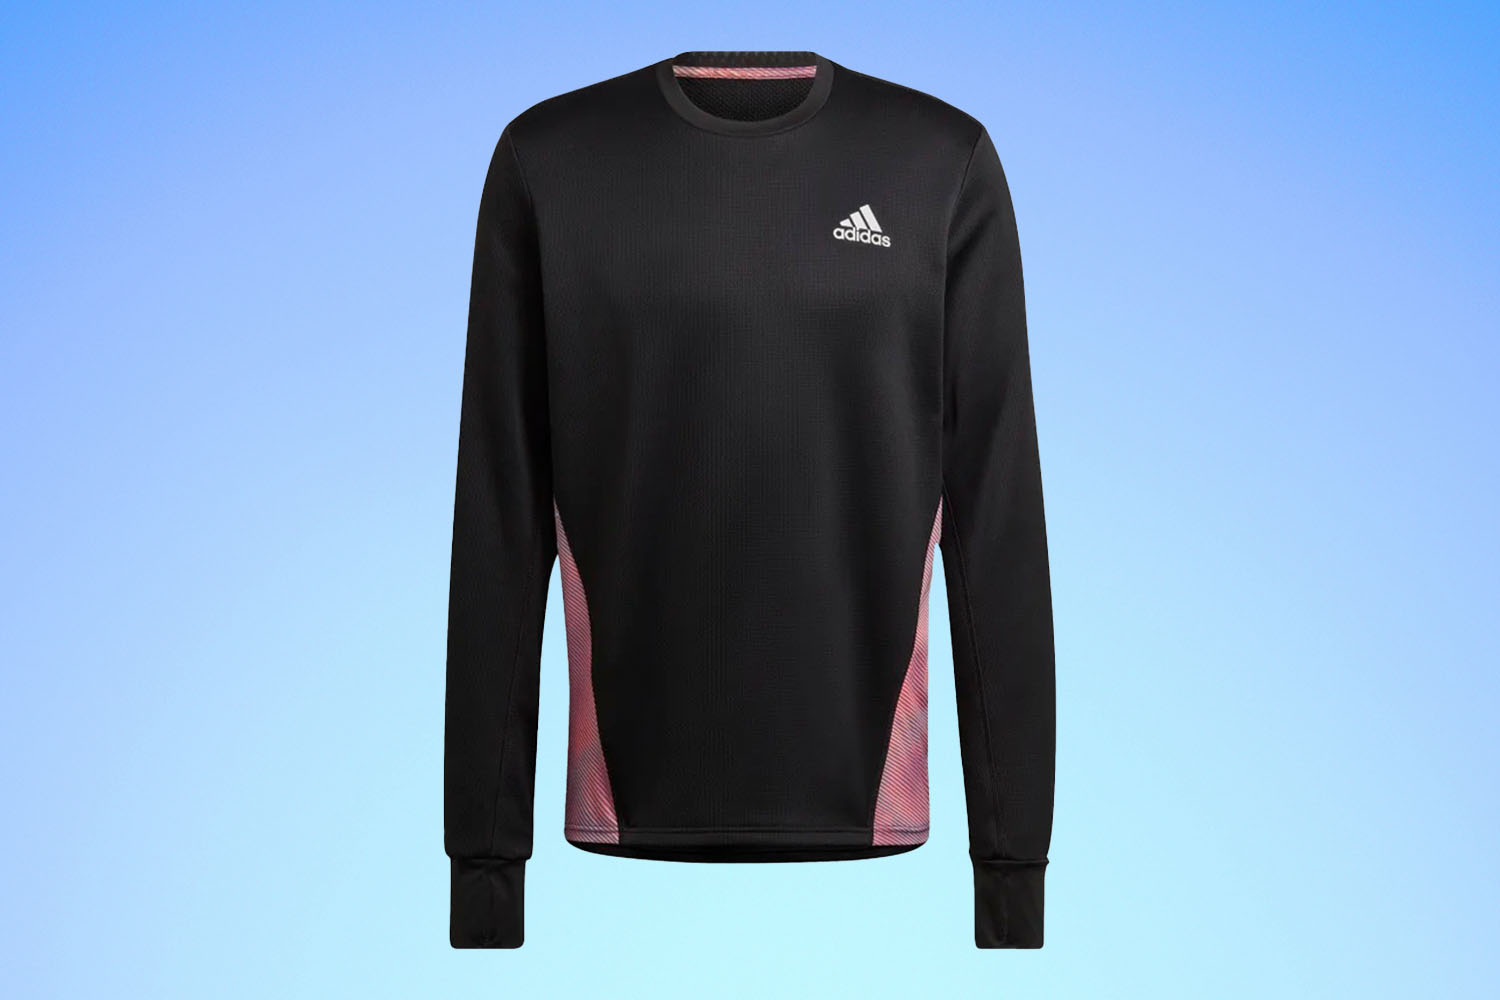 a black and pink running sweatshirt from Adidas on a blue gradient background